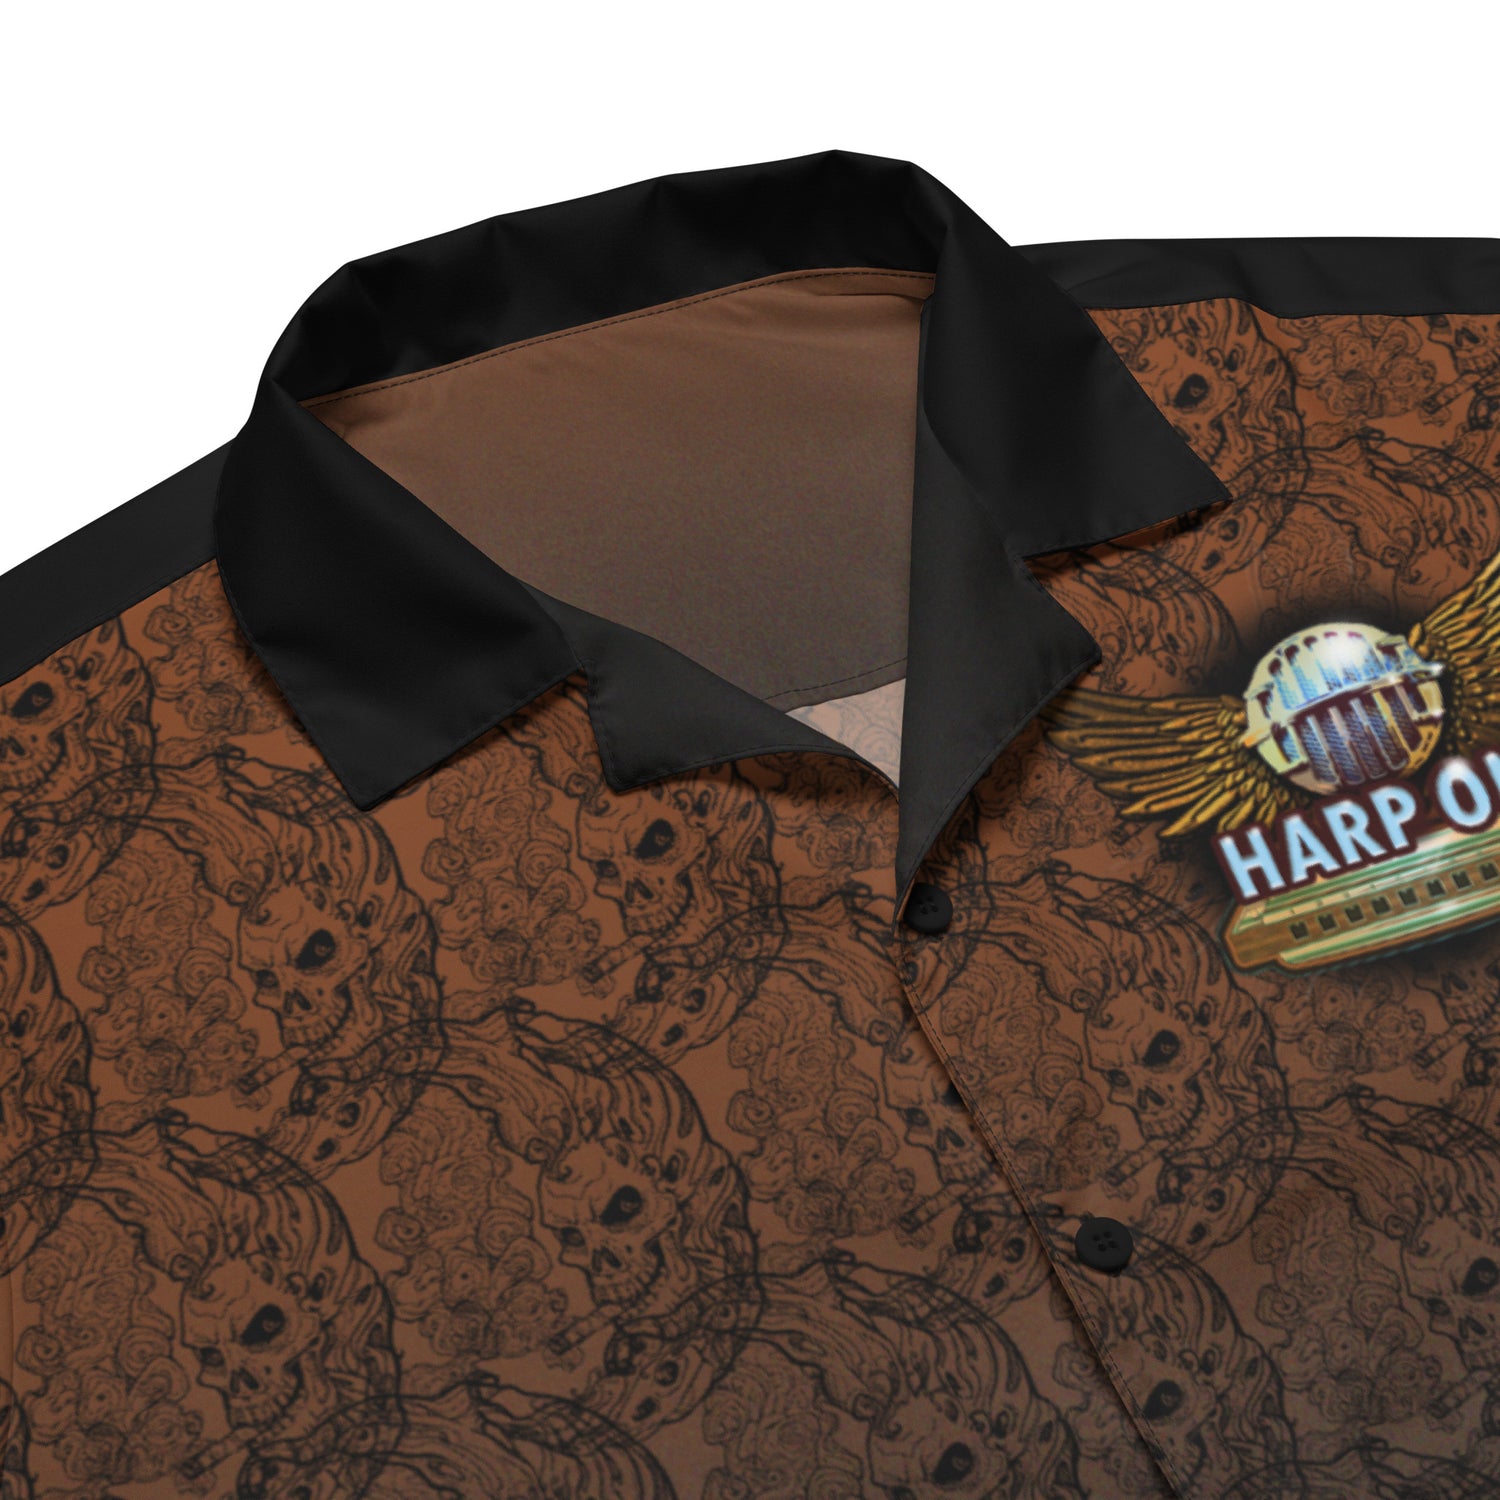 Harp on - Unisex button shirt - SIB.BLING RIVALRYOur Harp On brand looks slick on this killer button up short sleeve shirt. The signature style graphics is evident with the Smoking Moon-skull pattern on a rich deep sienna brown, trimmed with a charcoal trim.